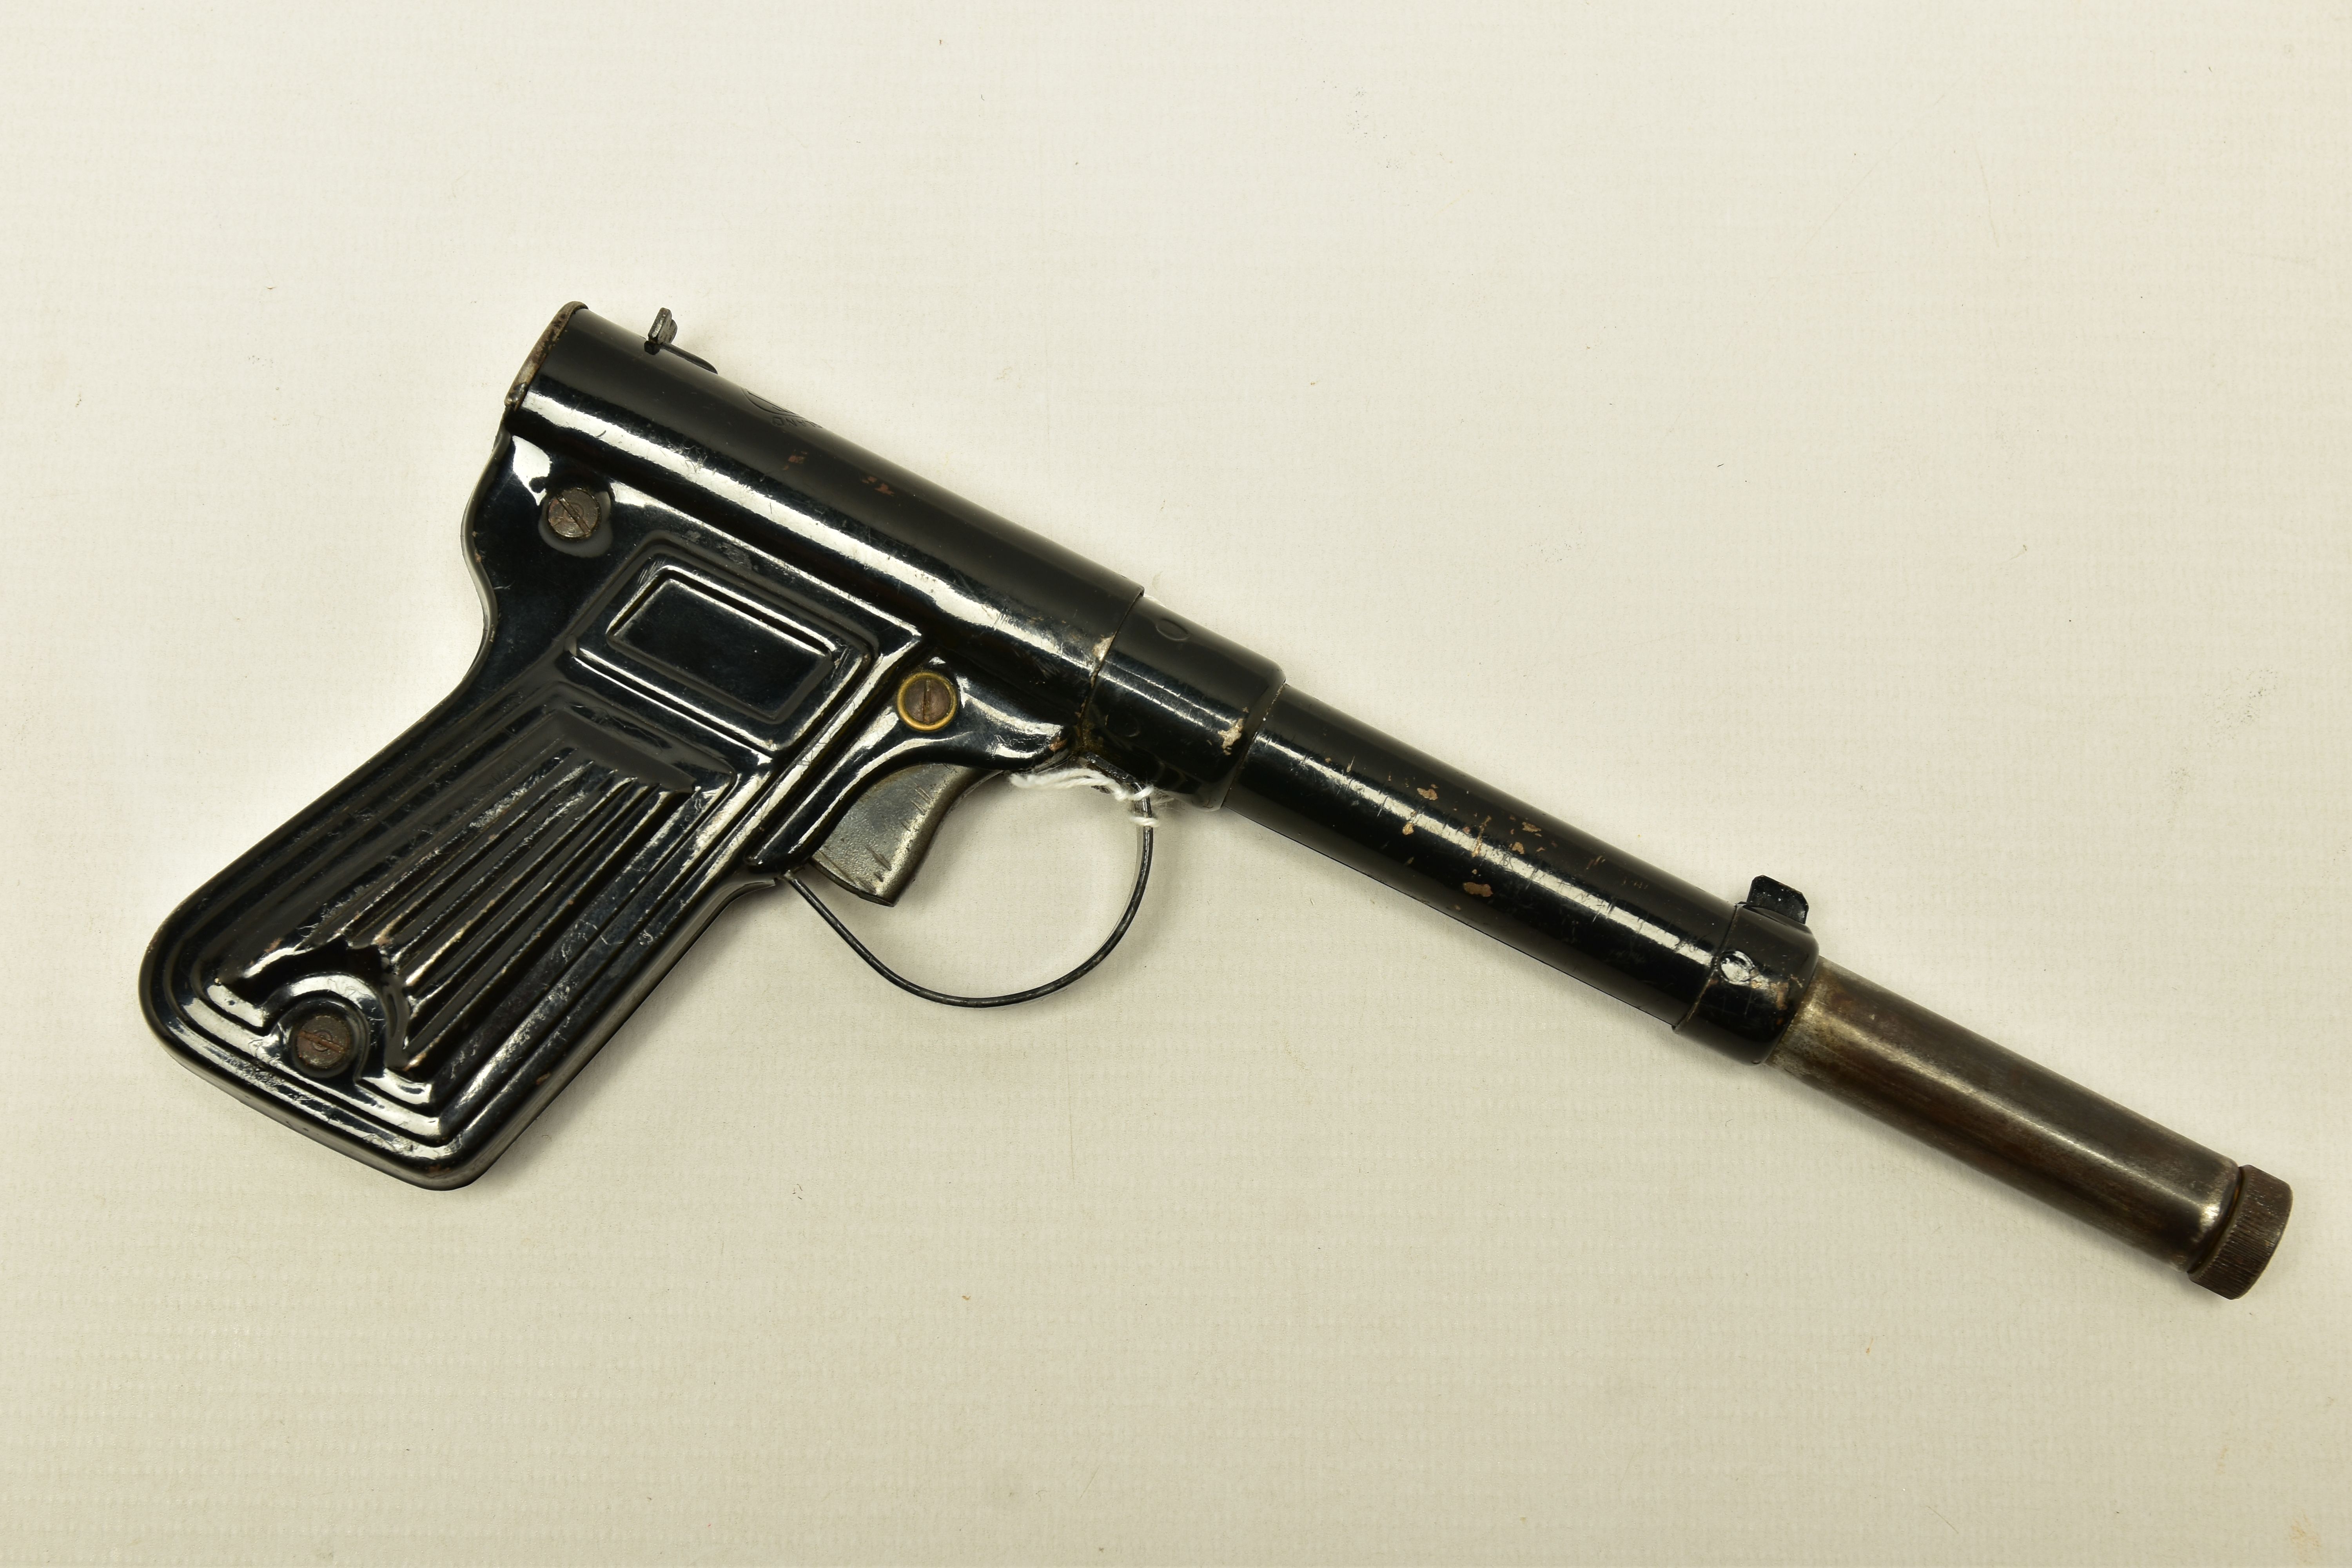 A .177 GAT TYPE PRE WWII AIR PISTOL complete with loading rod in working condition, its pressed